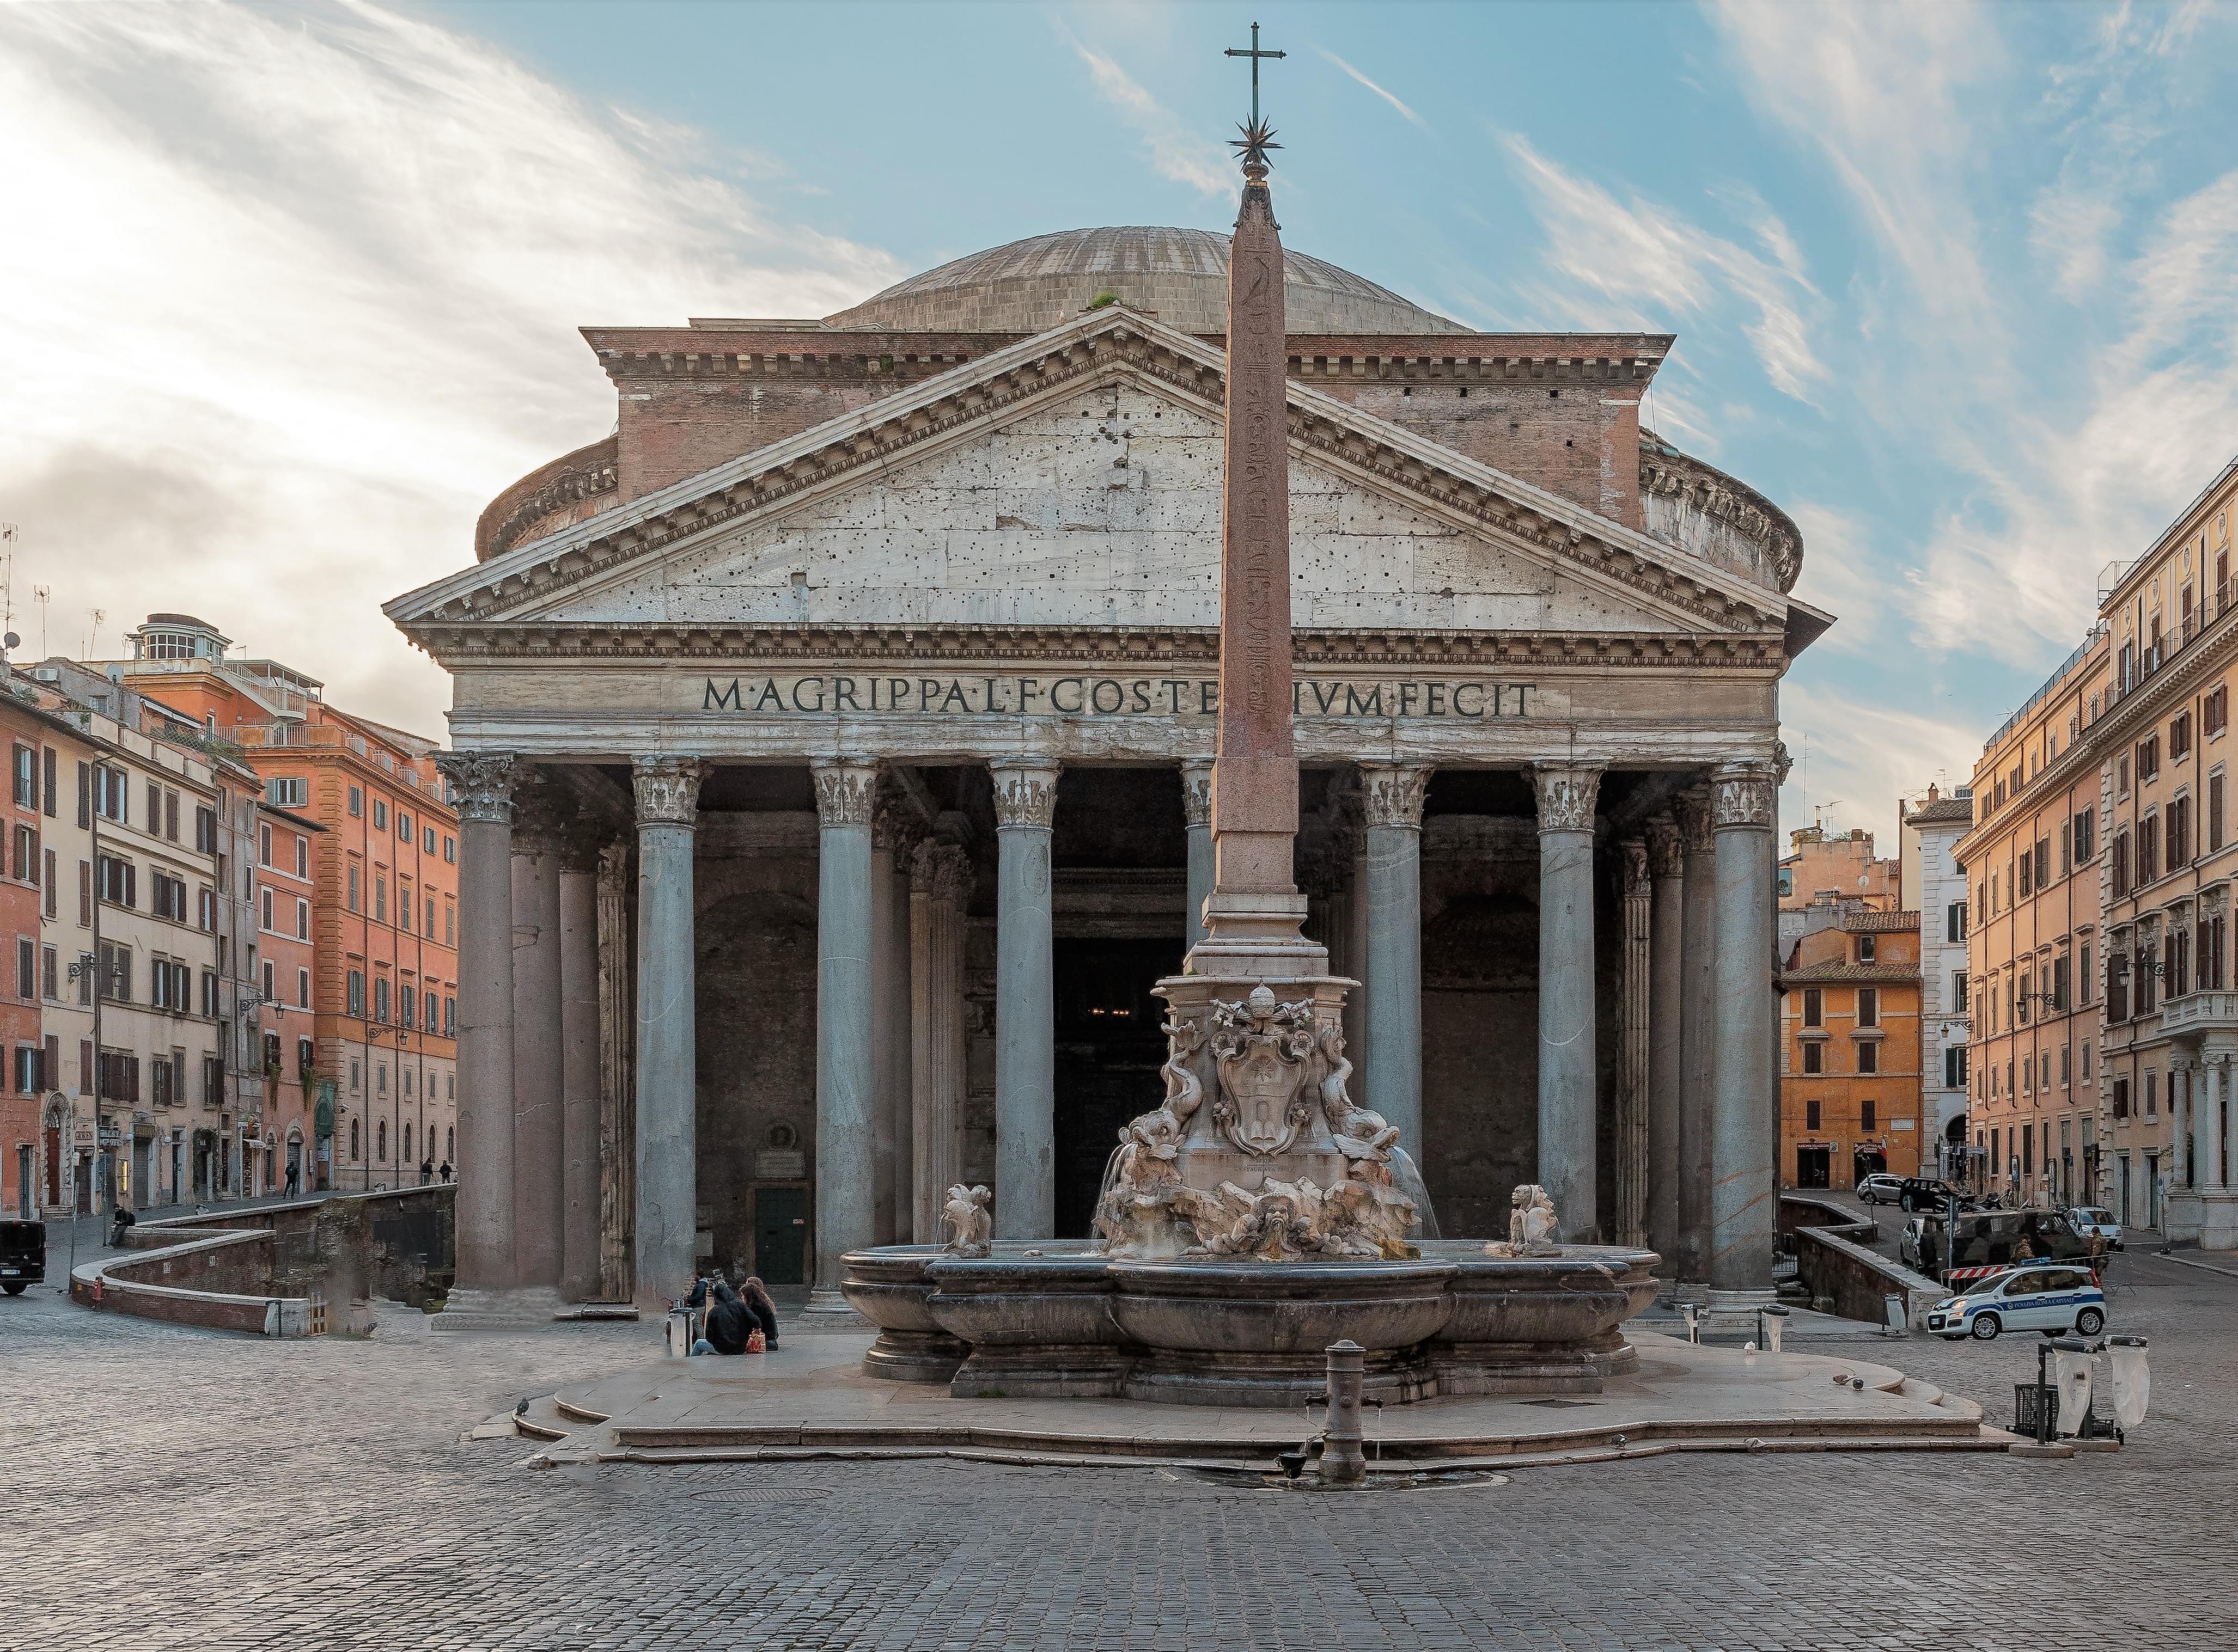 The exterior of the Pantheon